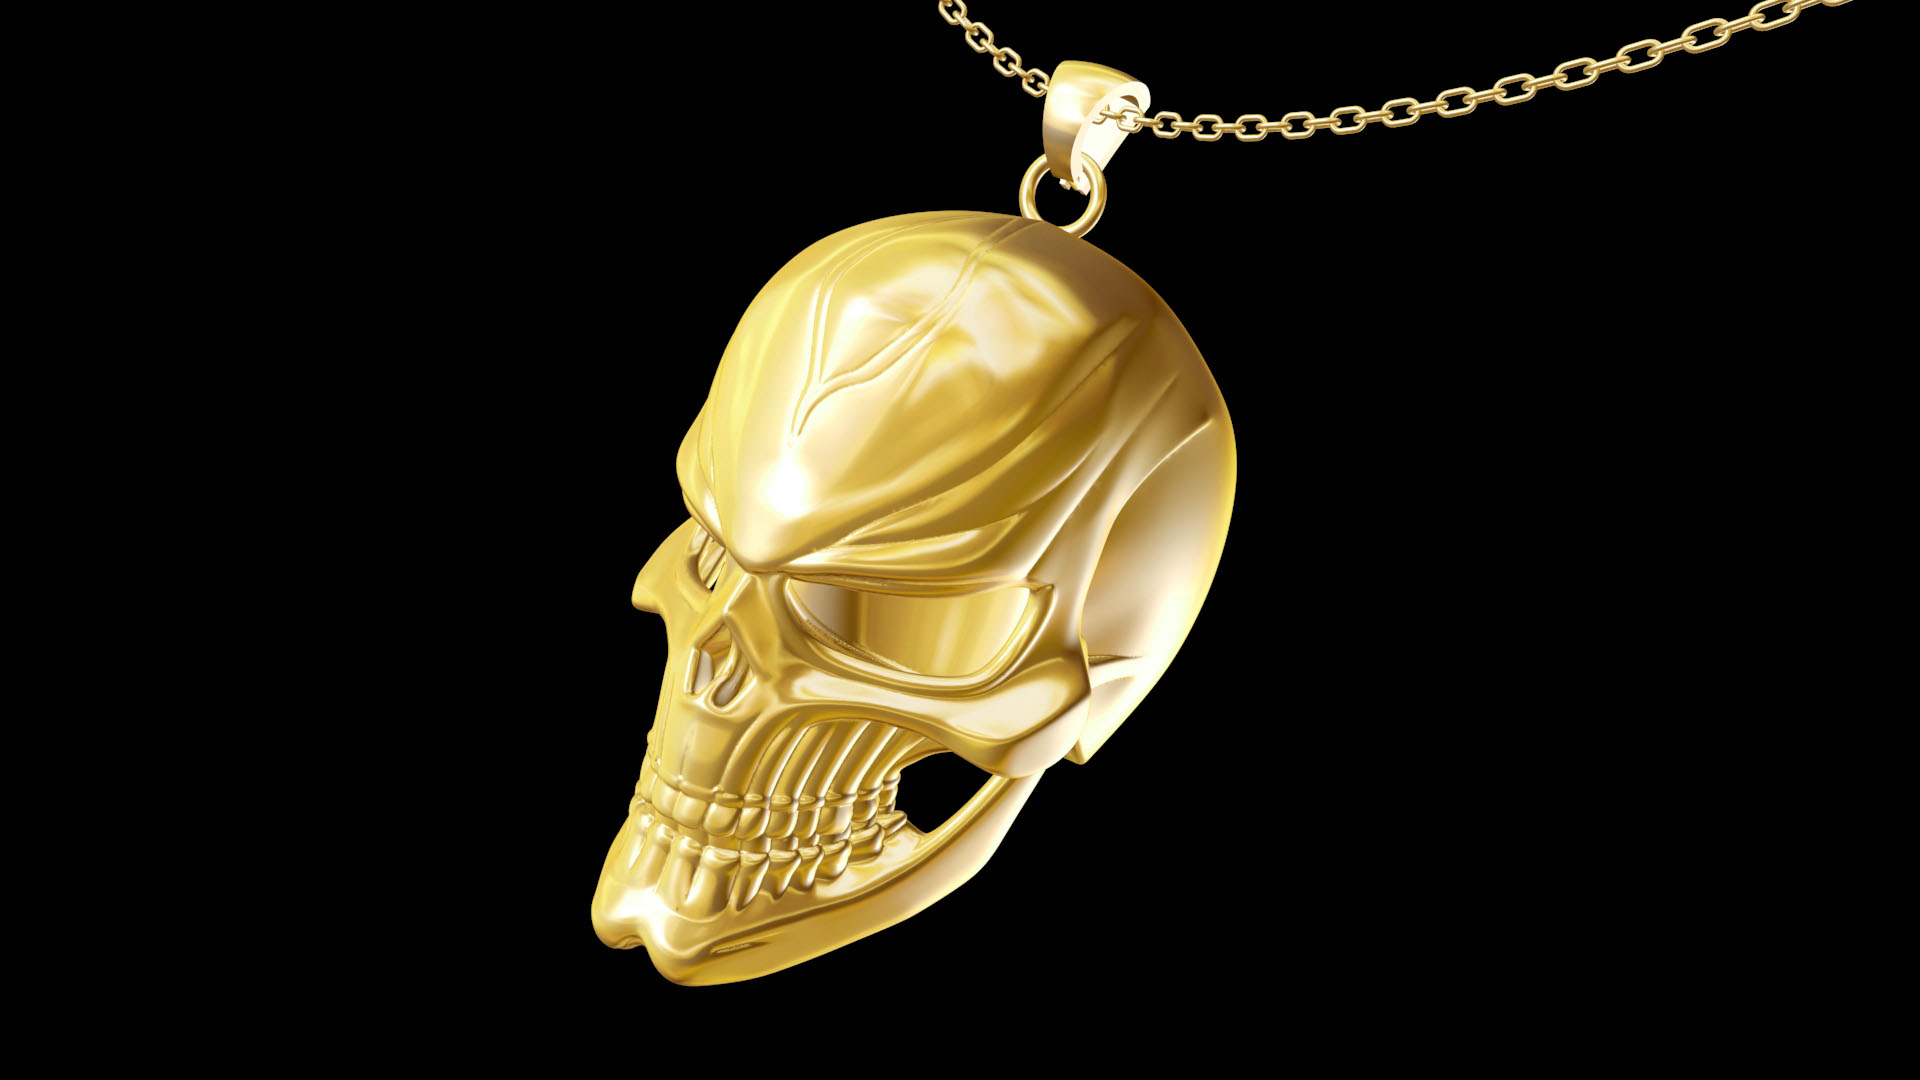 Ghost Rider Helmet pendant jewelry gold necklace